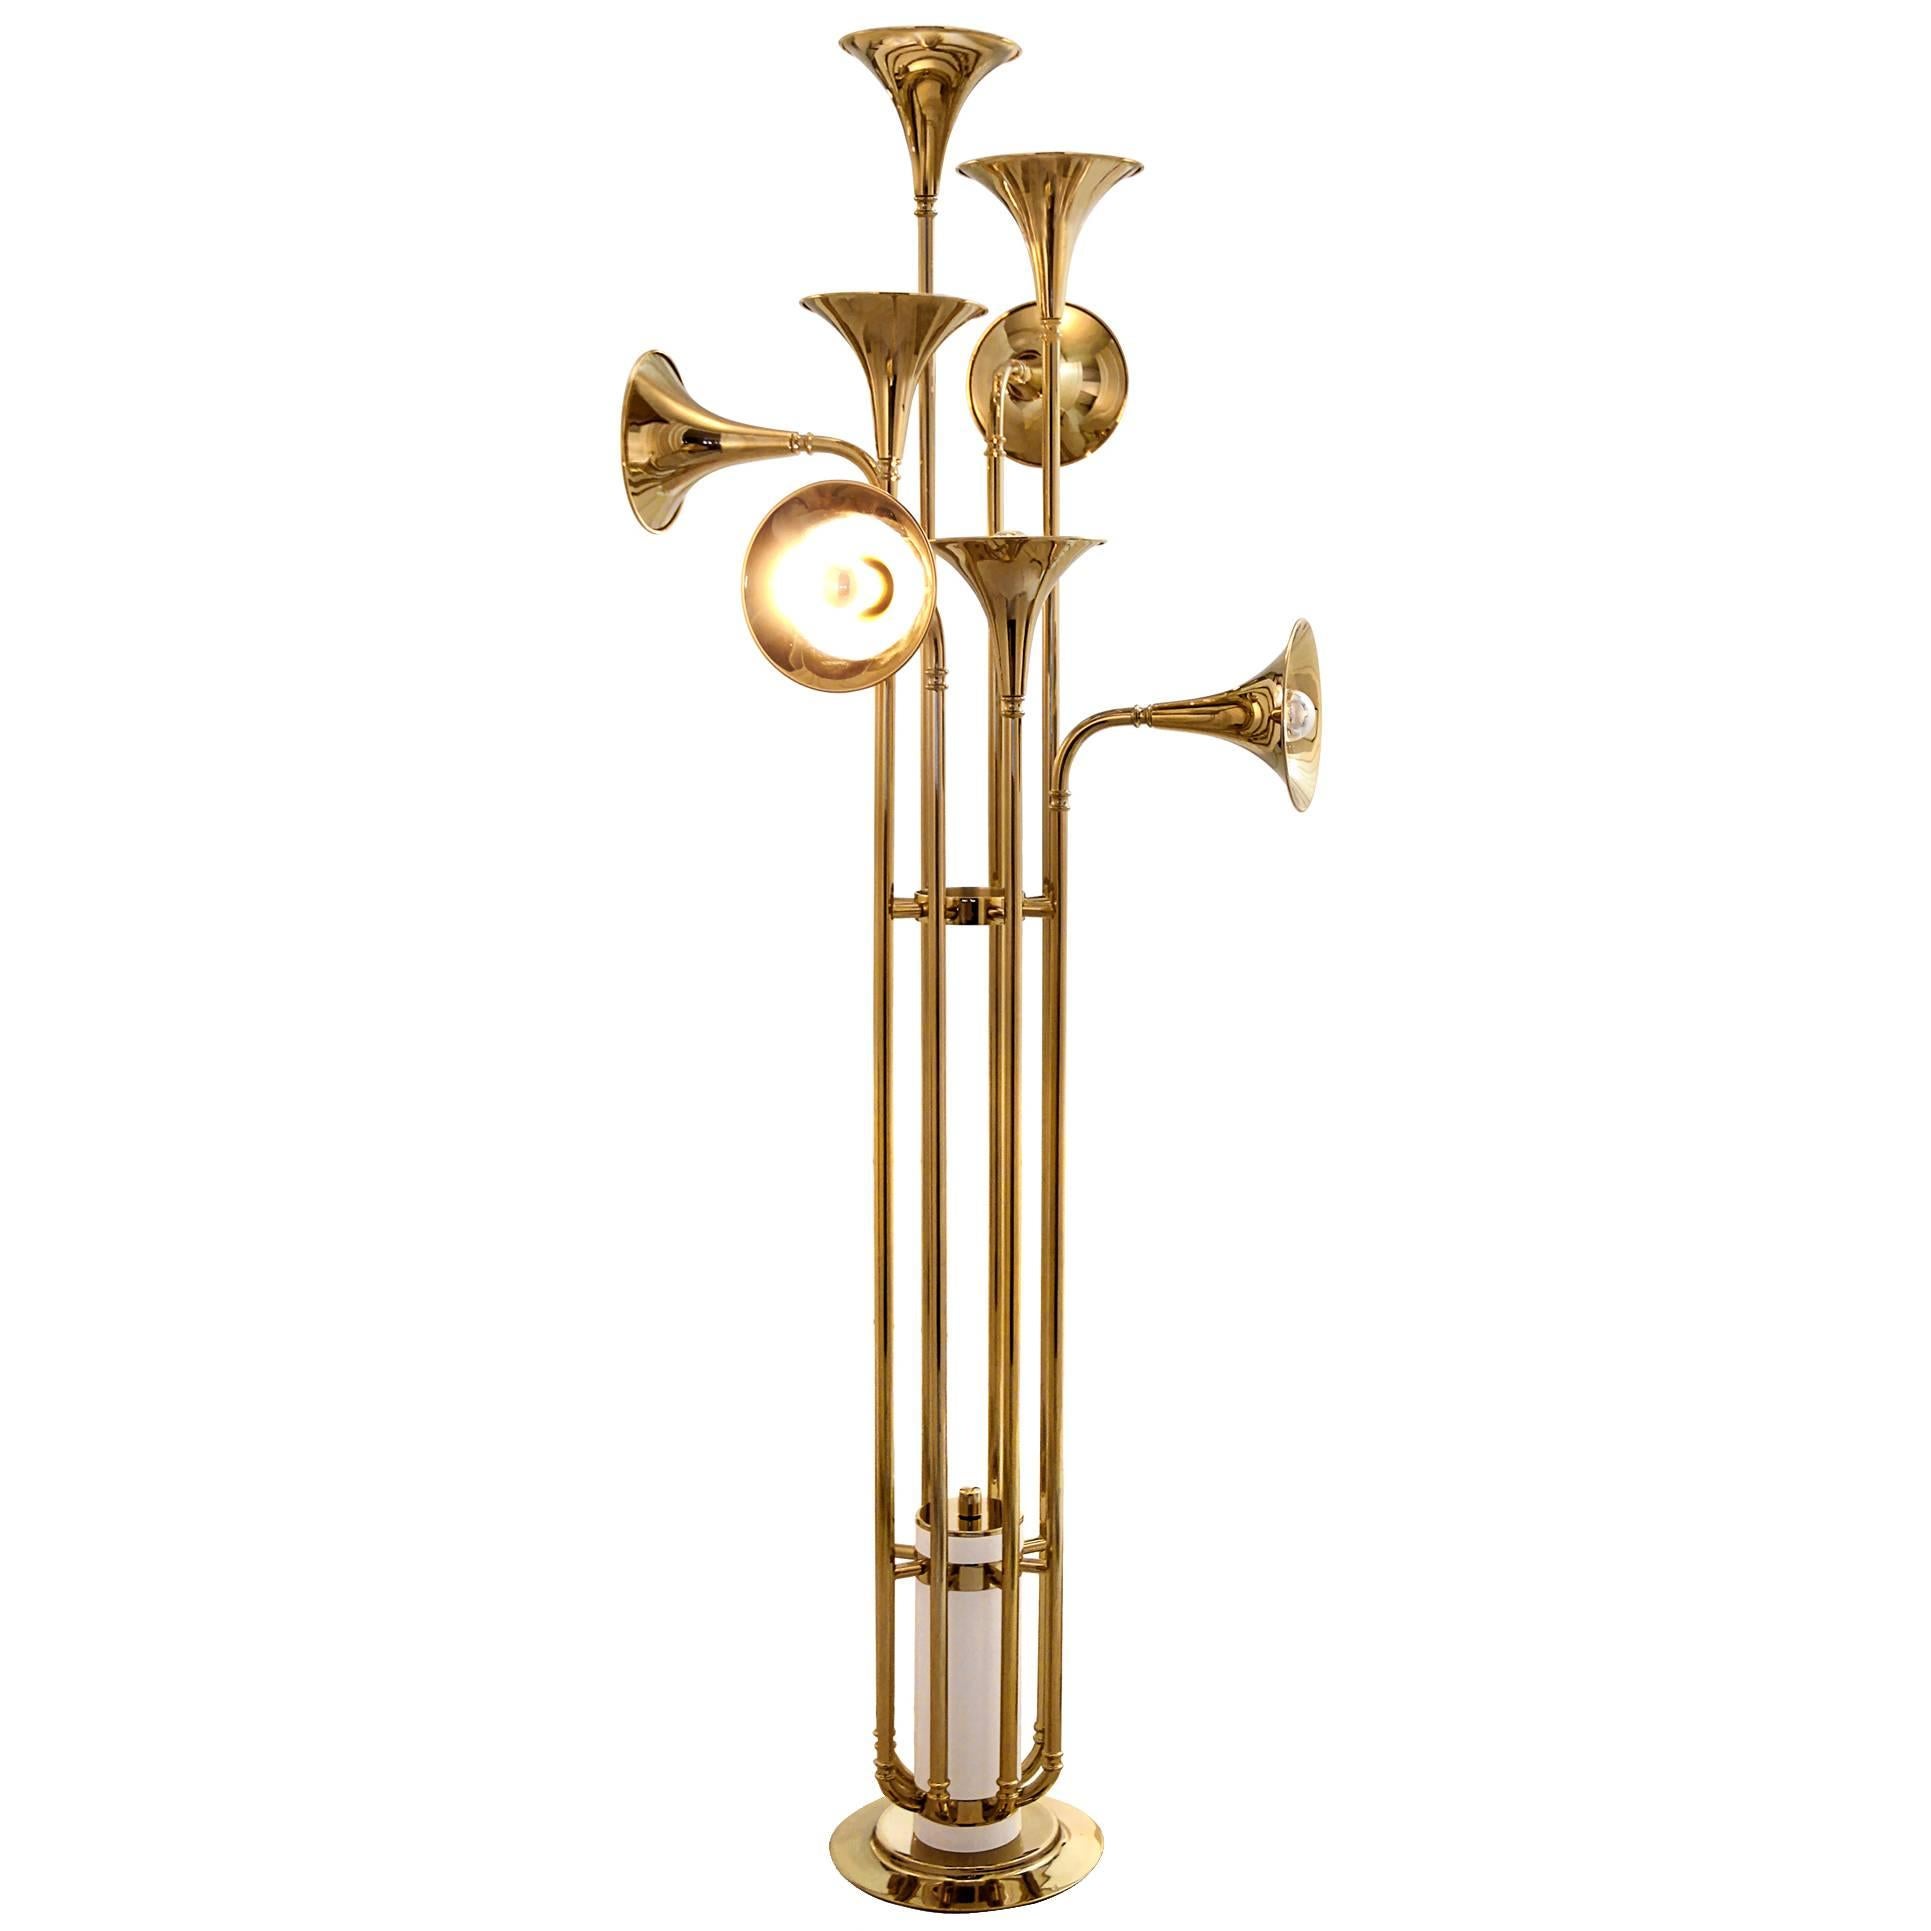 Brass and Gold-Plated Floor Lamp